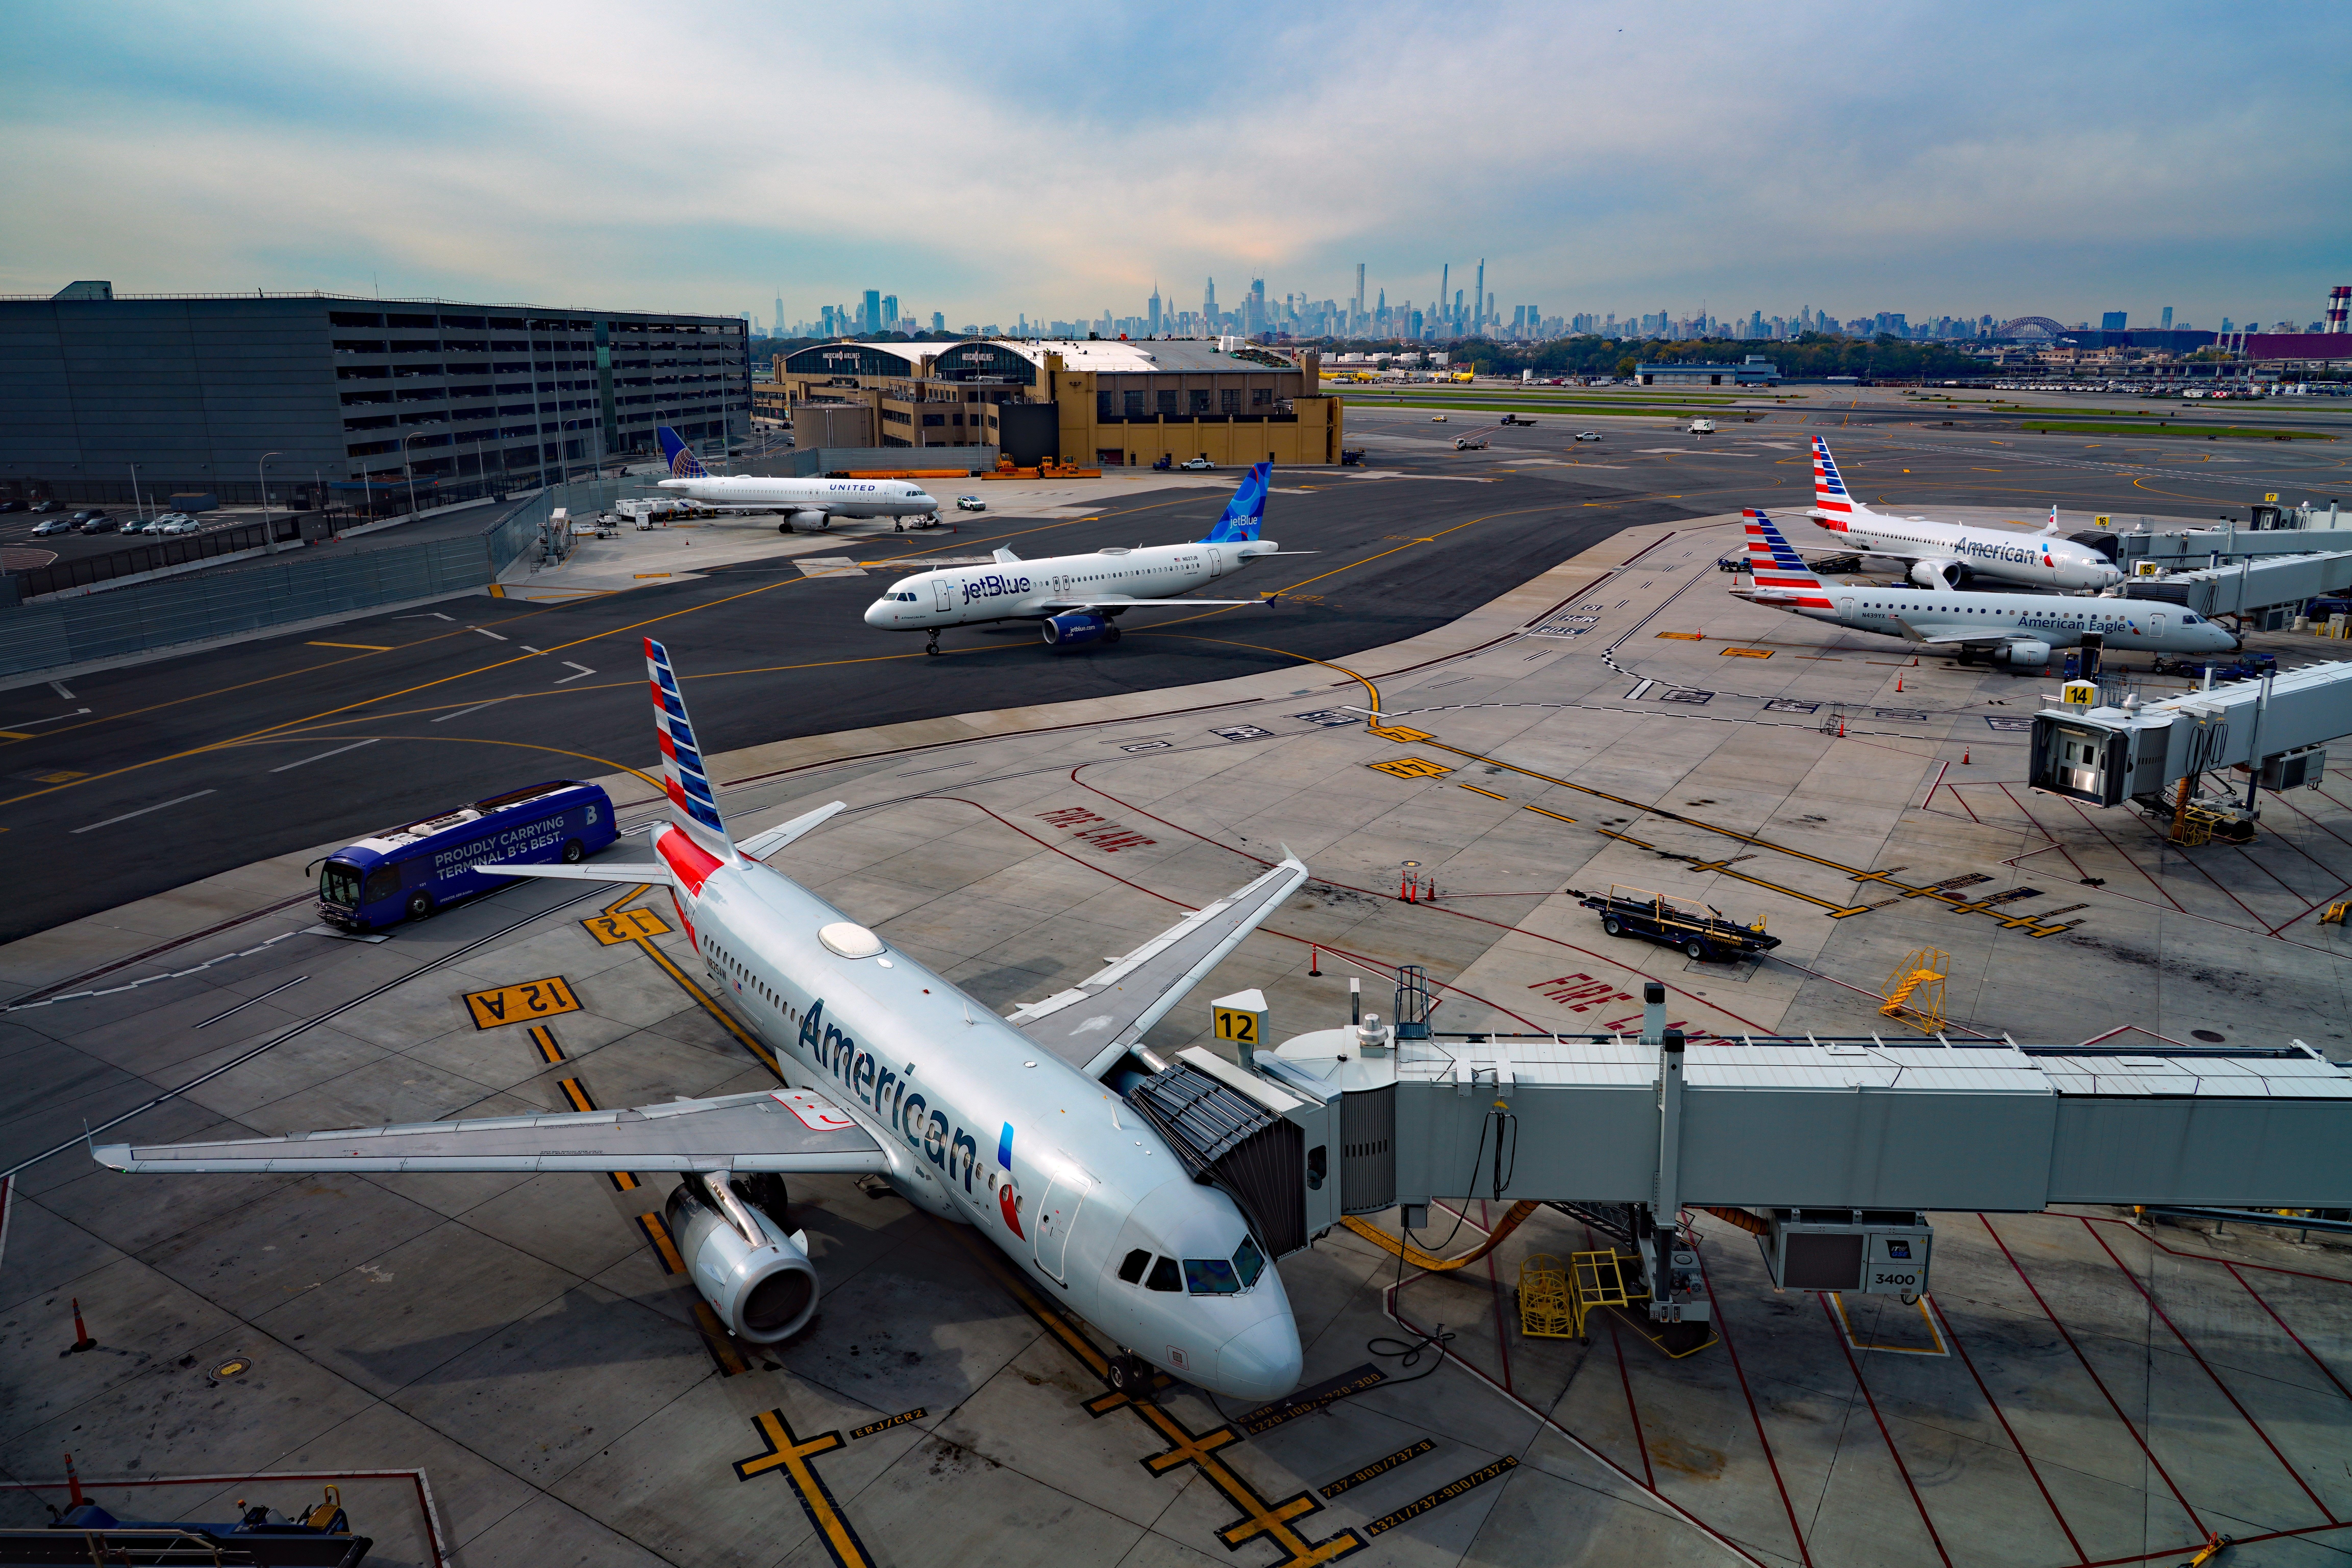 American Airlines and JetBlue aircraft at an airport